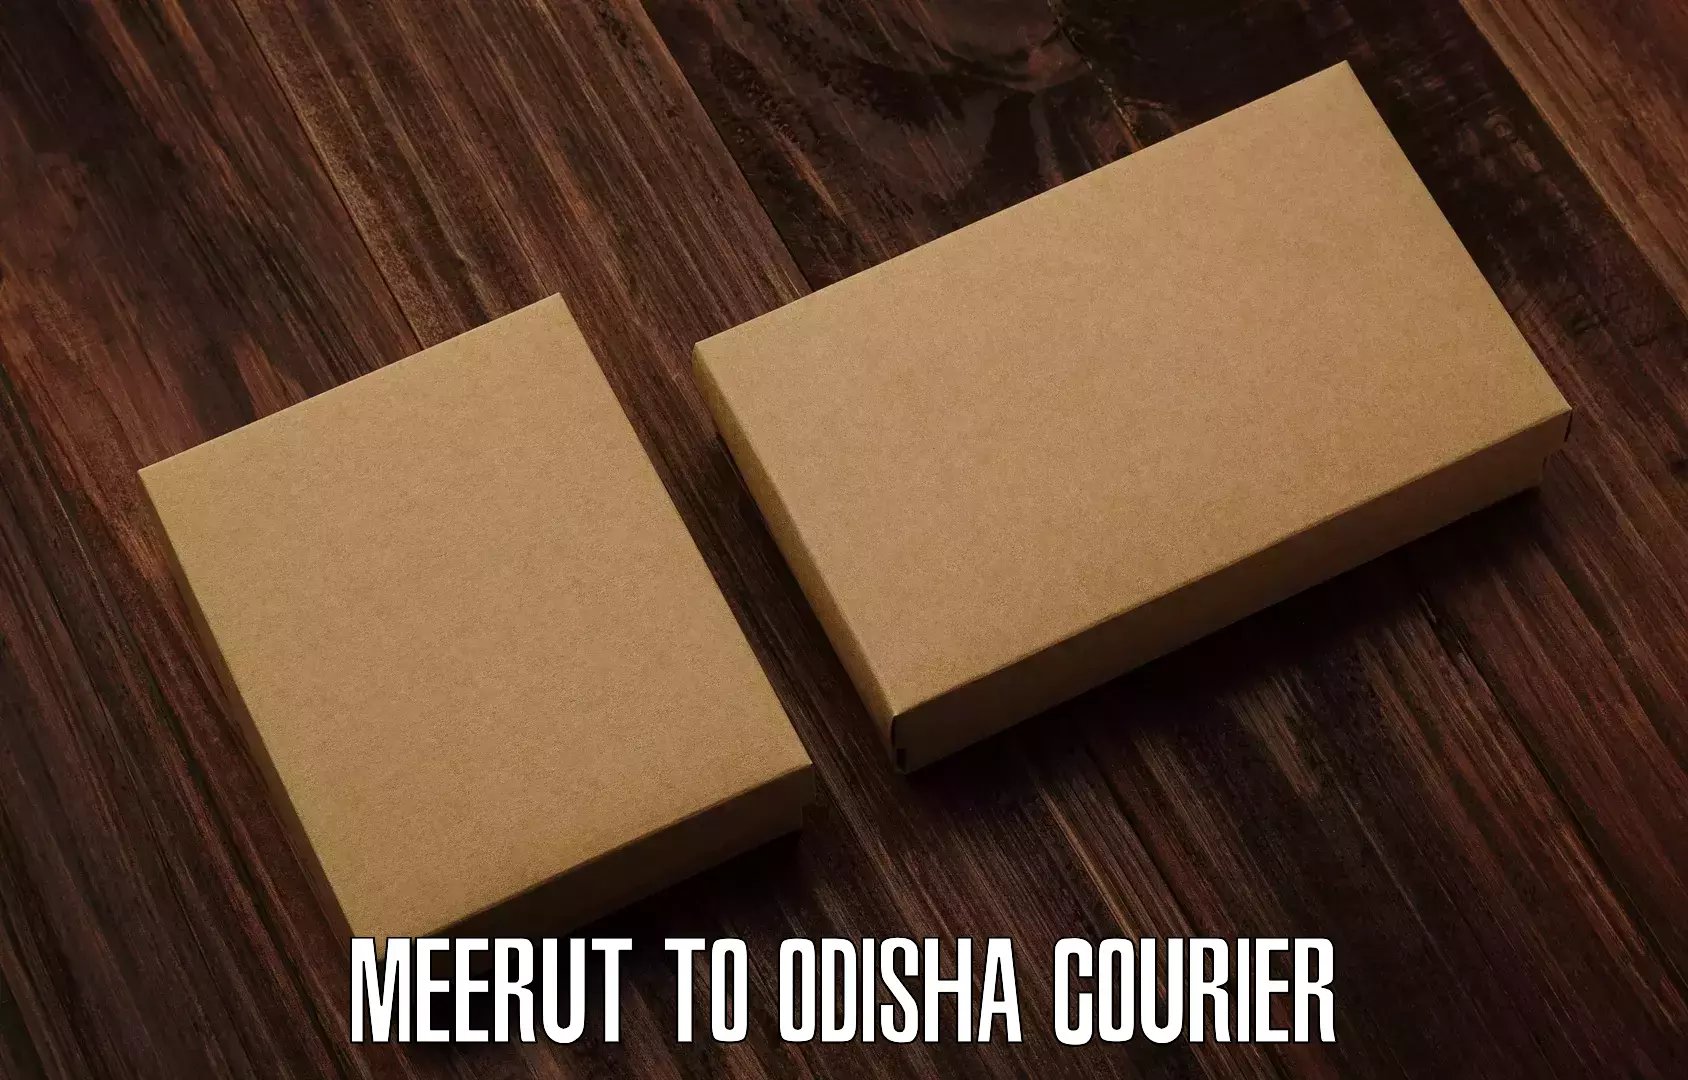 On-call courier service Meerut to Tangi